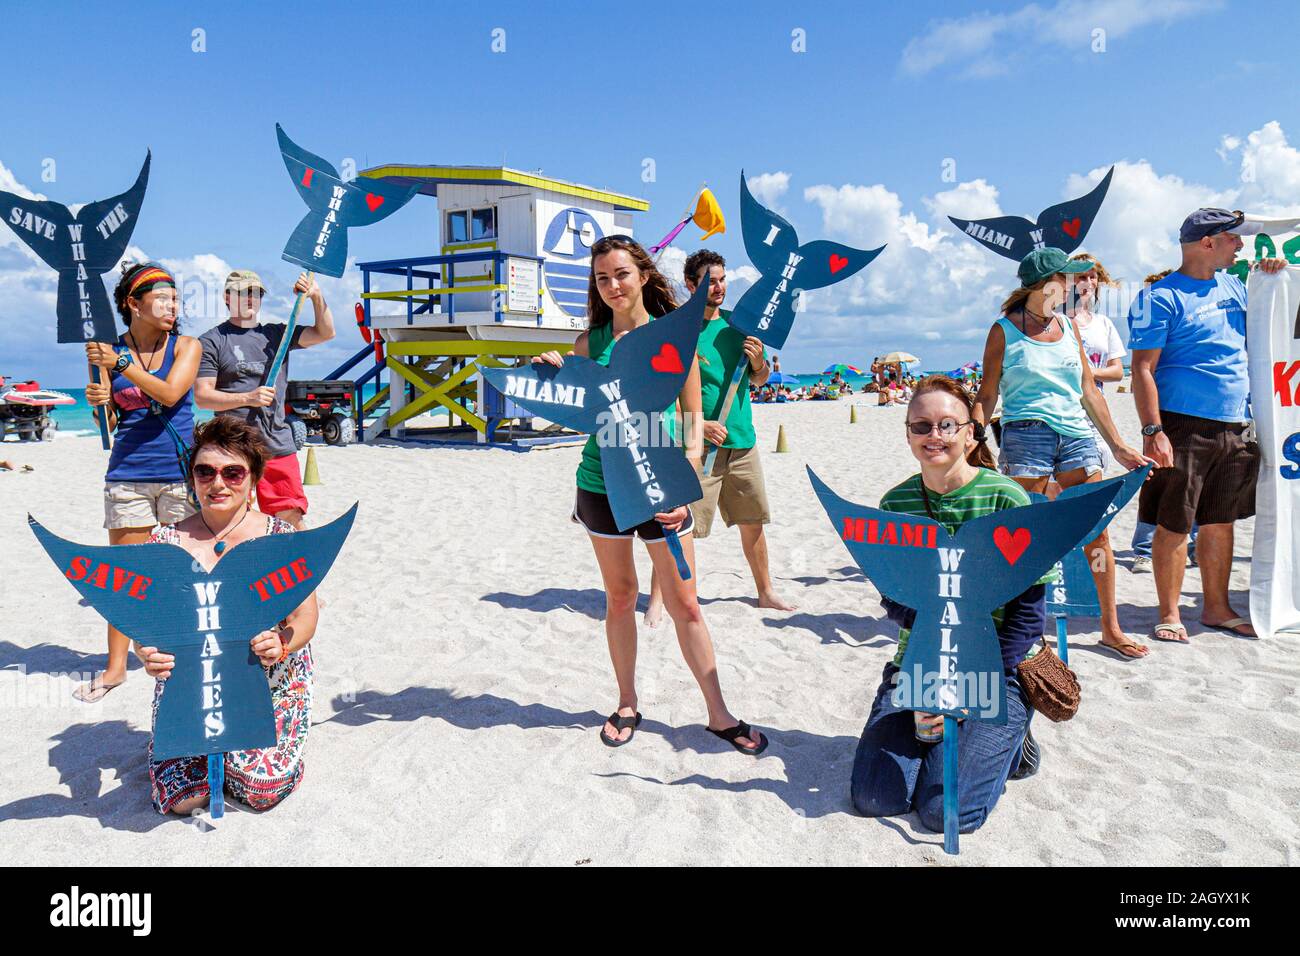 Miami Beach Florida,Greenpeace,demonstration,protest,Save the Whales,sign,group,supporters,FL100526035 Stock Photo